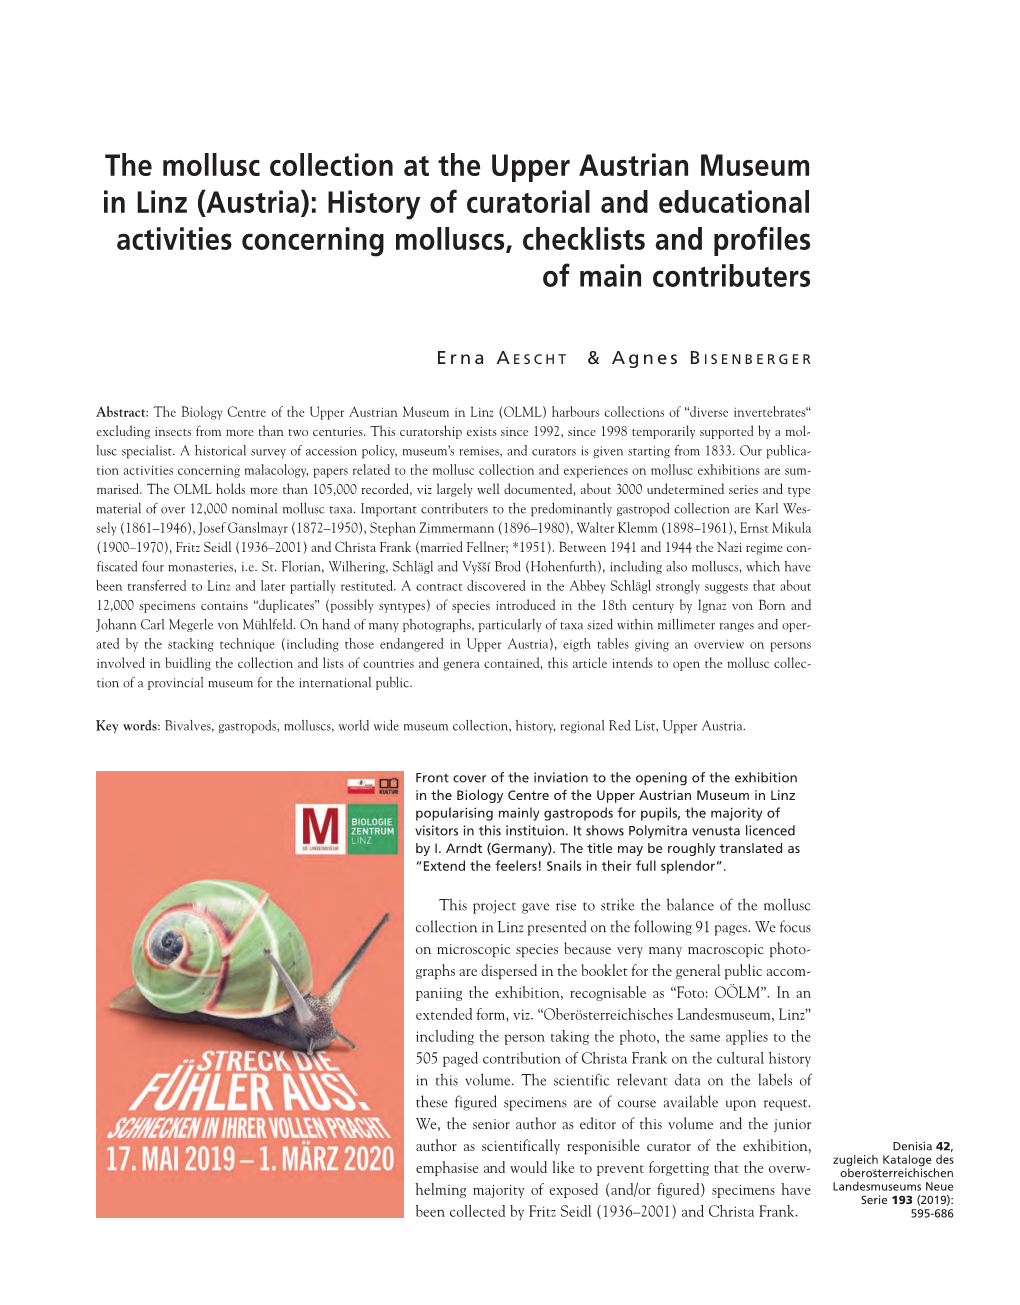 Austrian Museum in Linz (Austria): History of Curatorial and Educational Activities Concerning Molluscs, Checklists and Profiles of Main Contributers